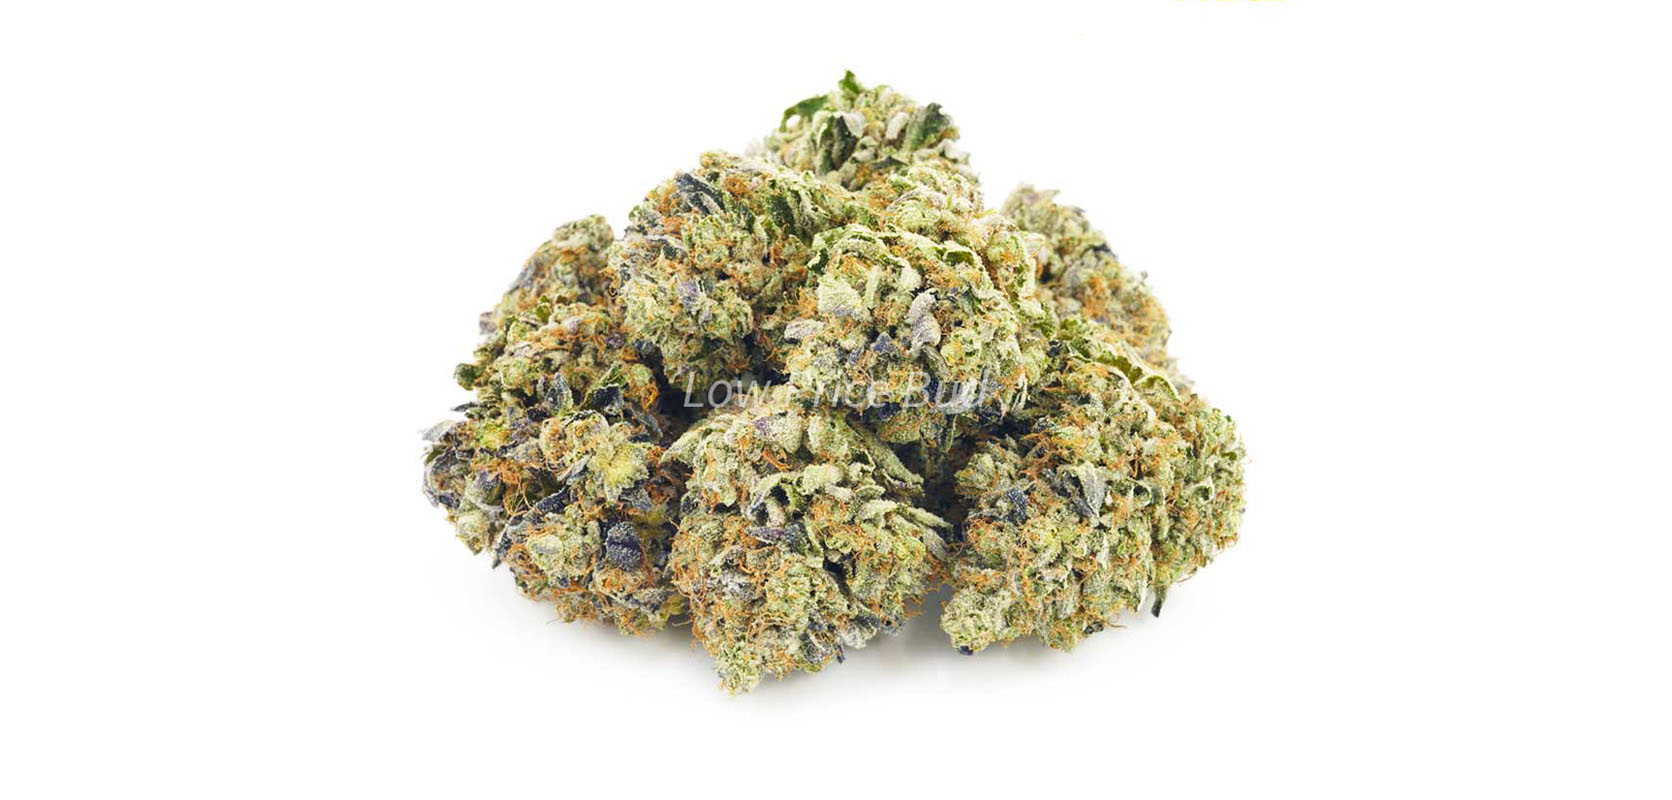 OG Octane value buds at Low Price Bud weed dispensary. Buy weed online. Cheapweed, budget bud, edibles, and gummys.